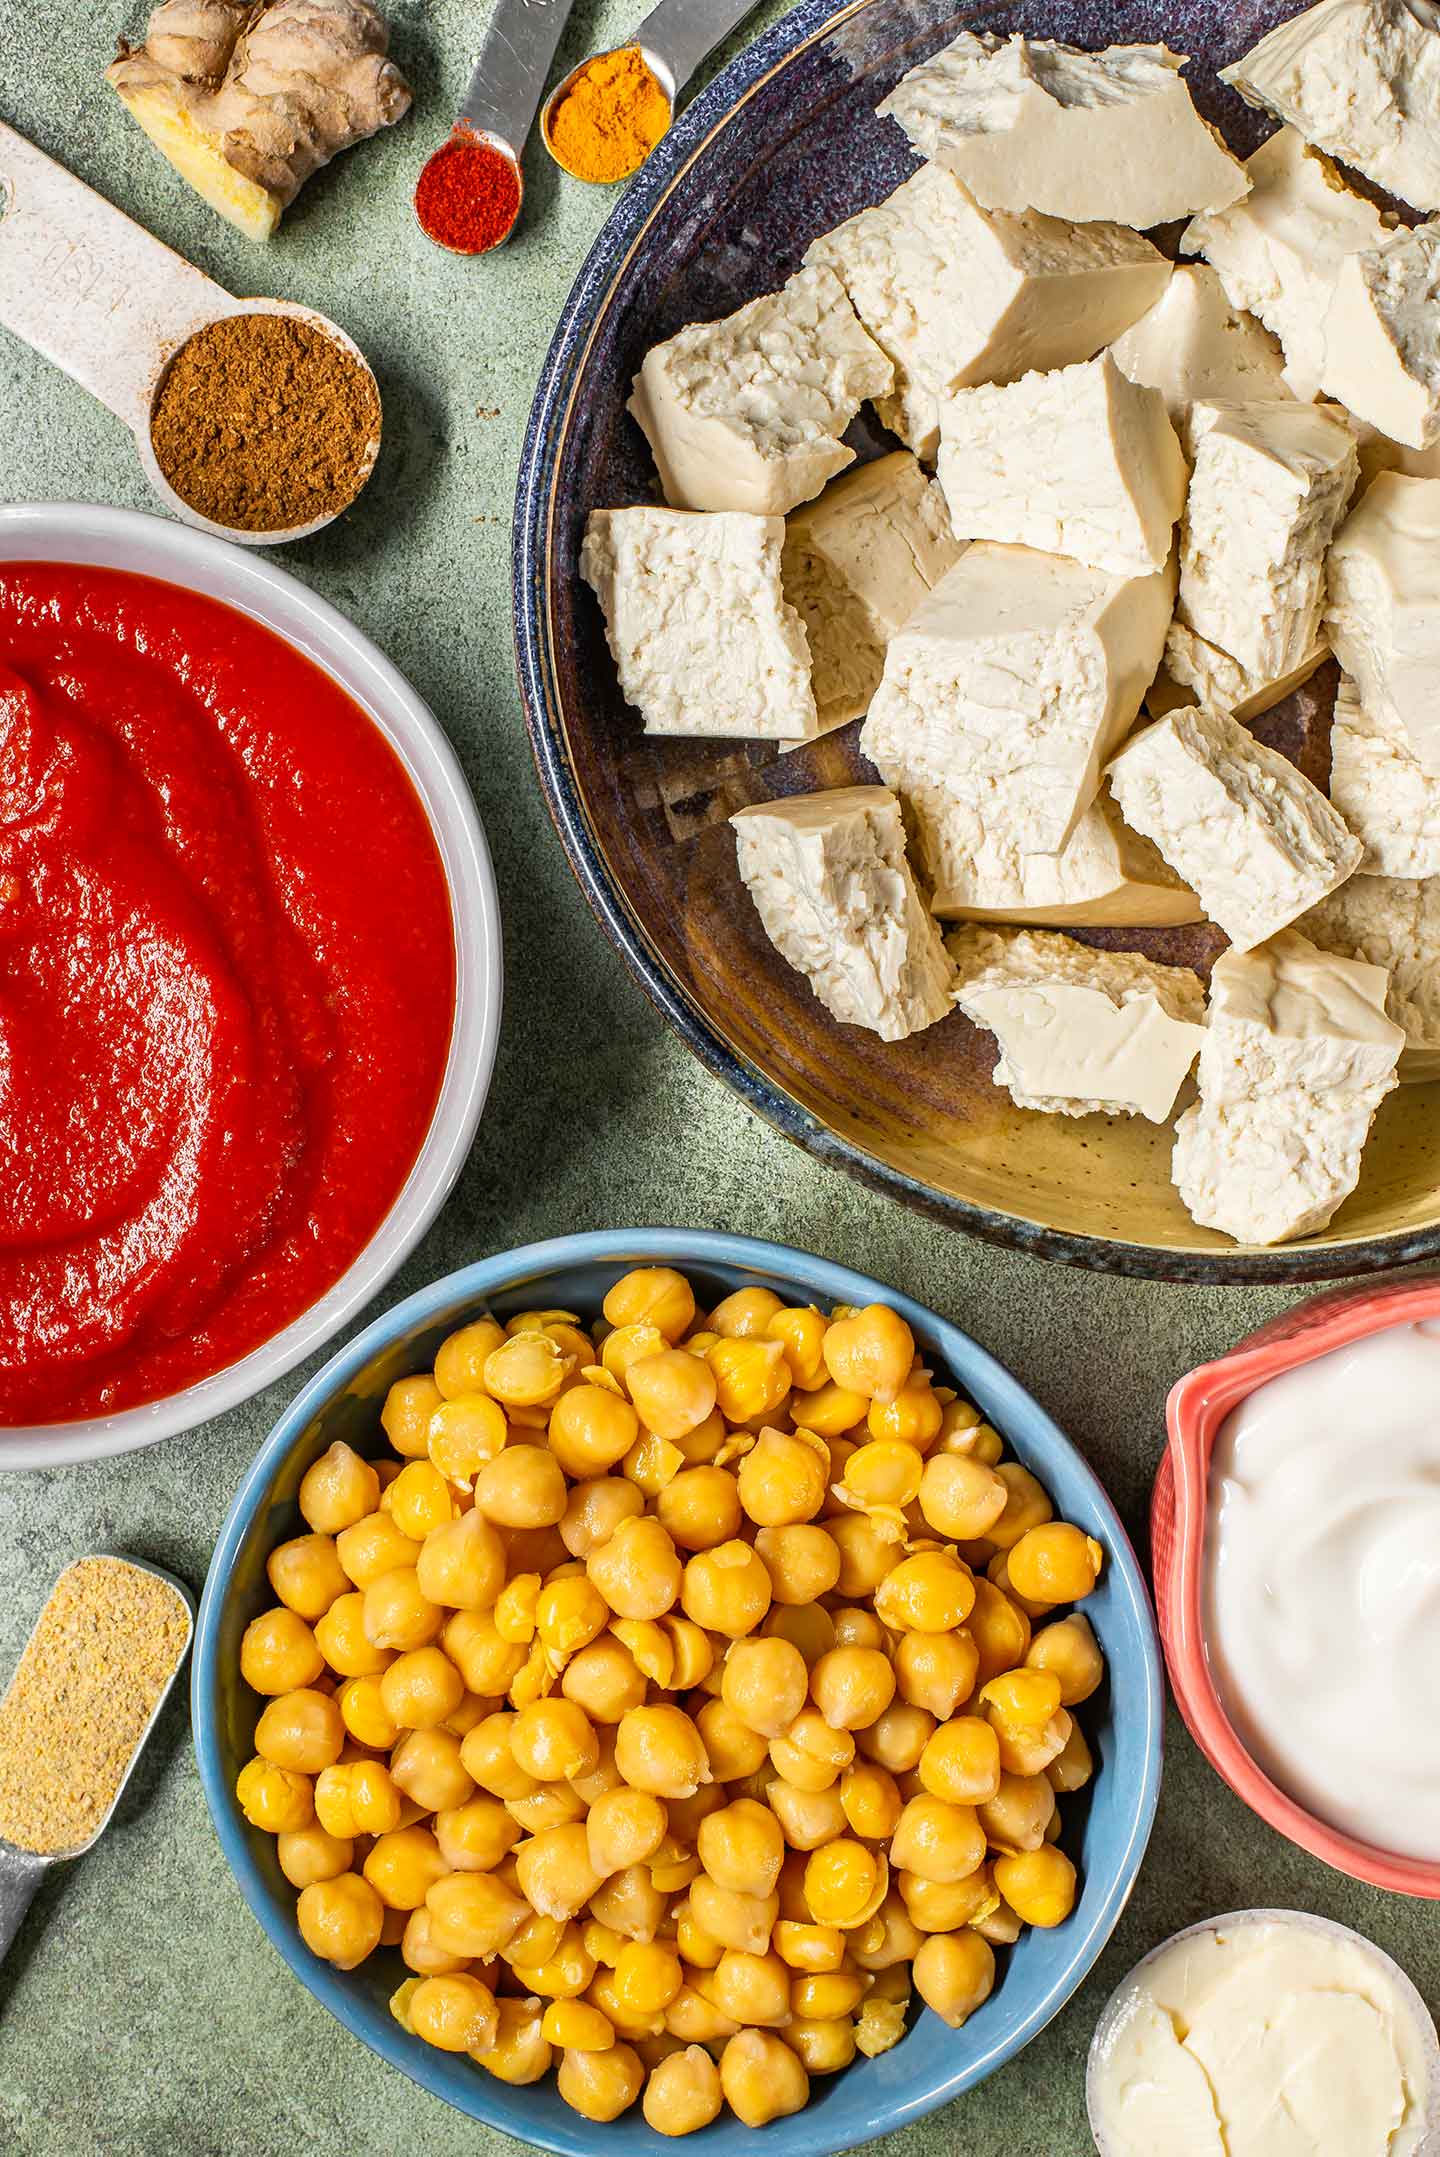 Top down view of ingredients. Hand pulled chunks of firm tofu, chickpeas, crushed tomatoes, vegan yogurt, and spices.